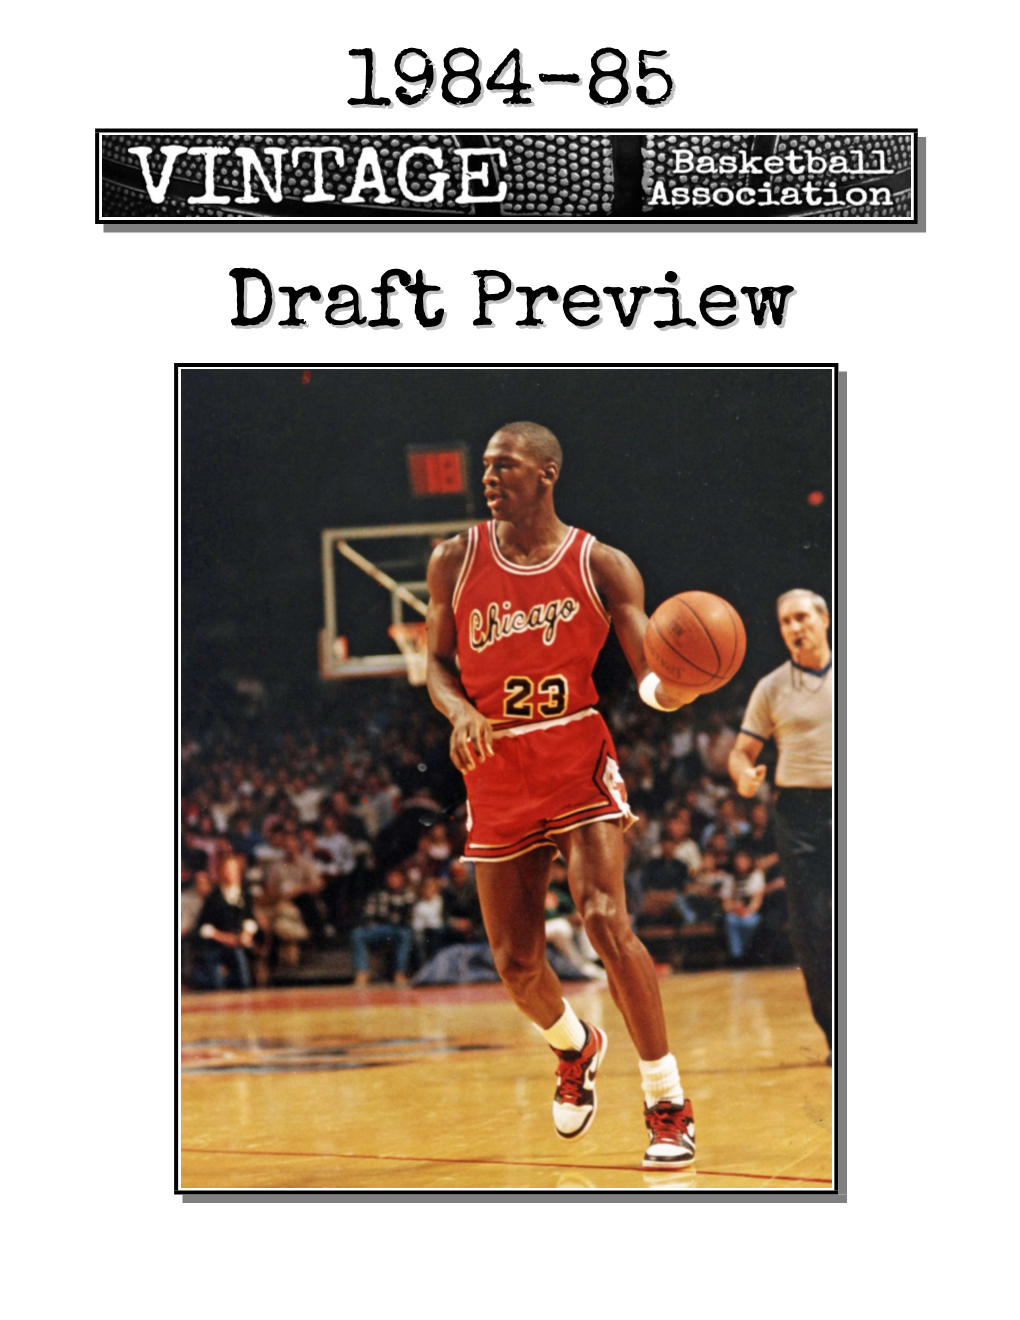 Draft Previewpreview “From Purely a Star Power Standpoint, Yes, the Class of 1984 Is the Best Ever